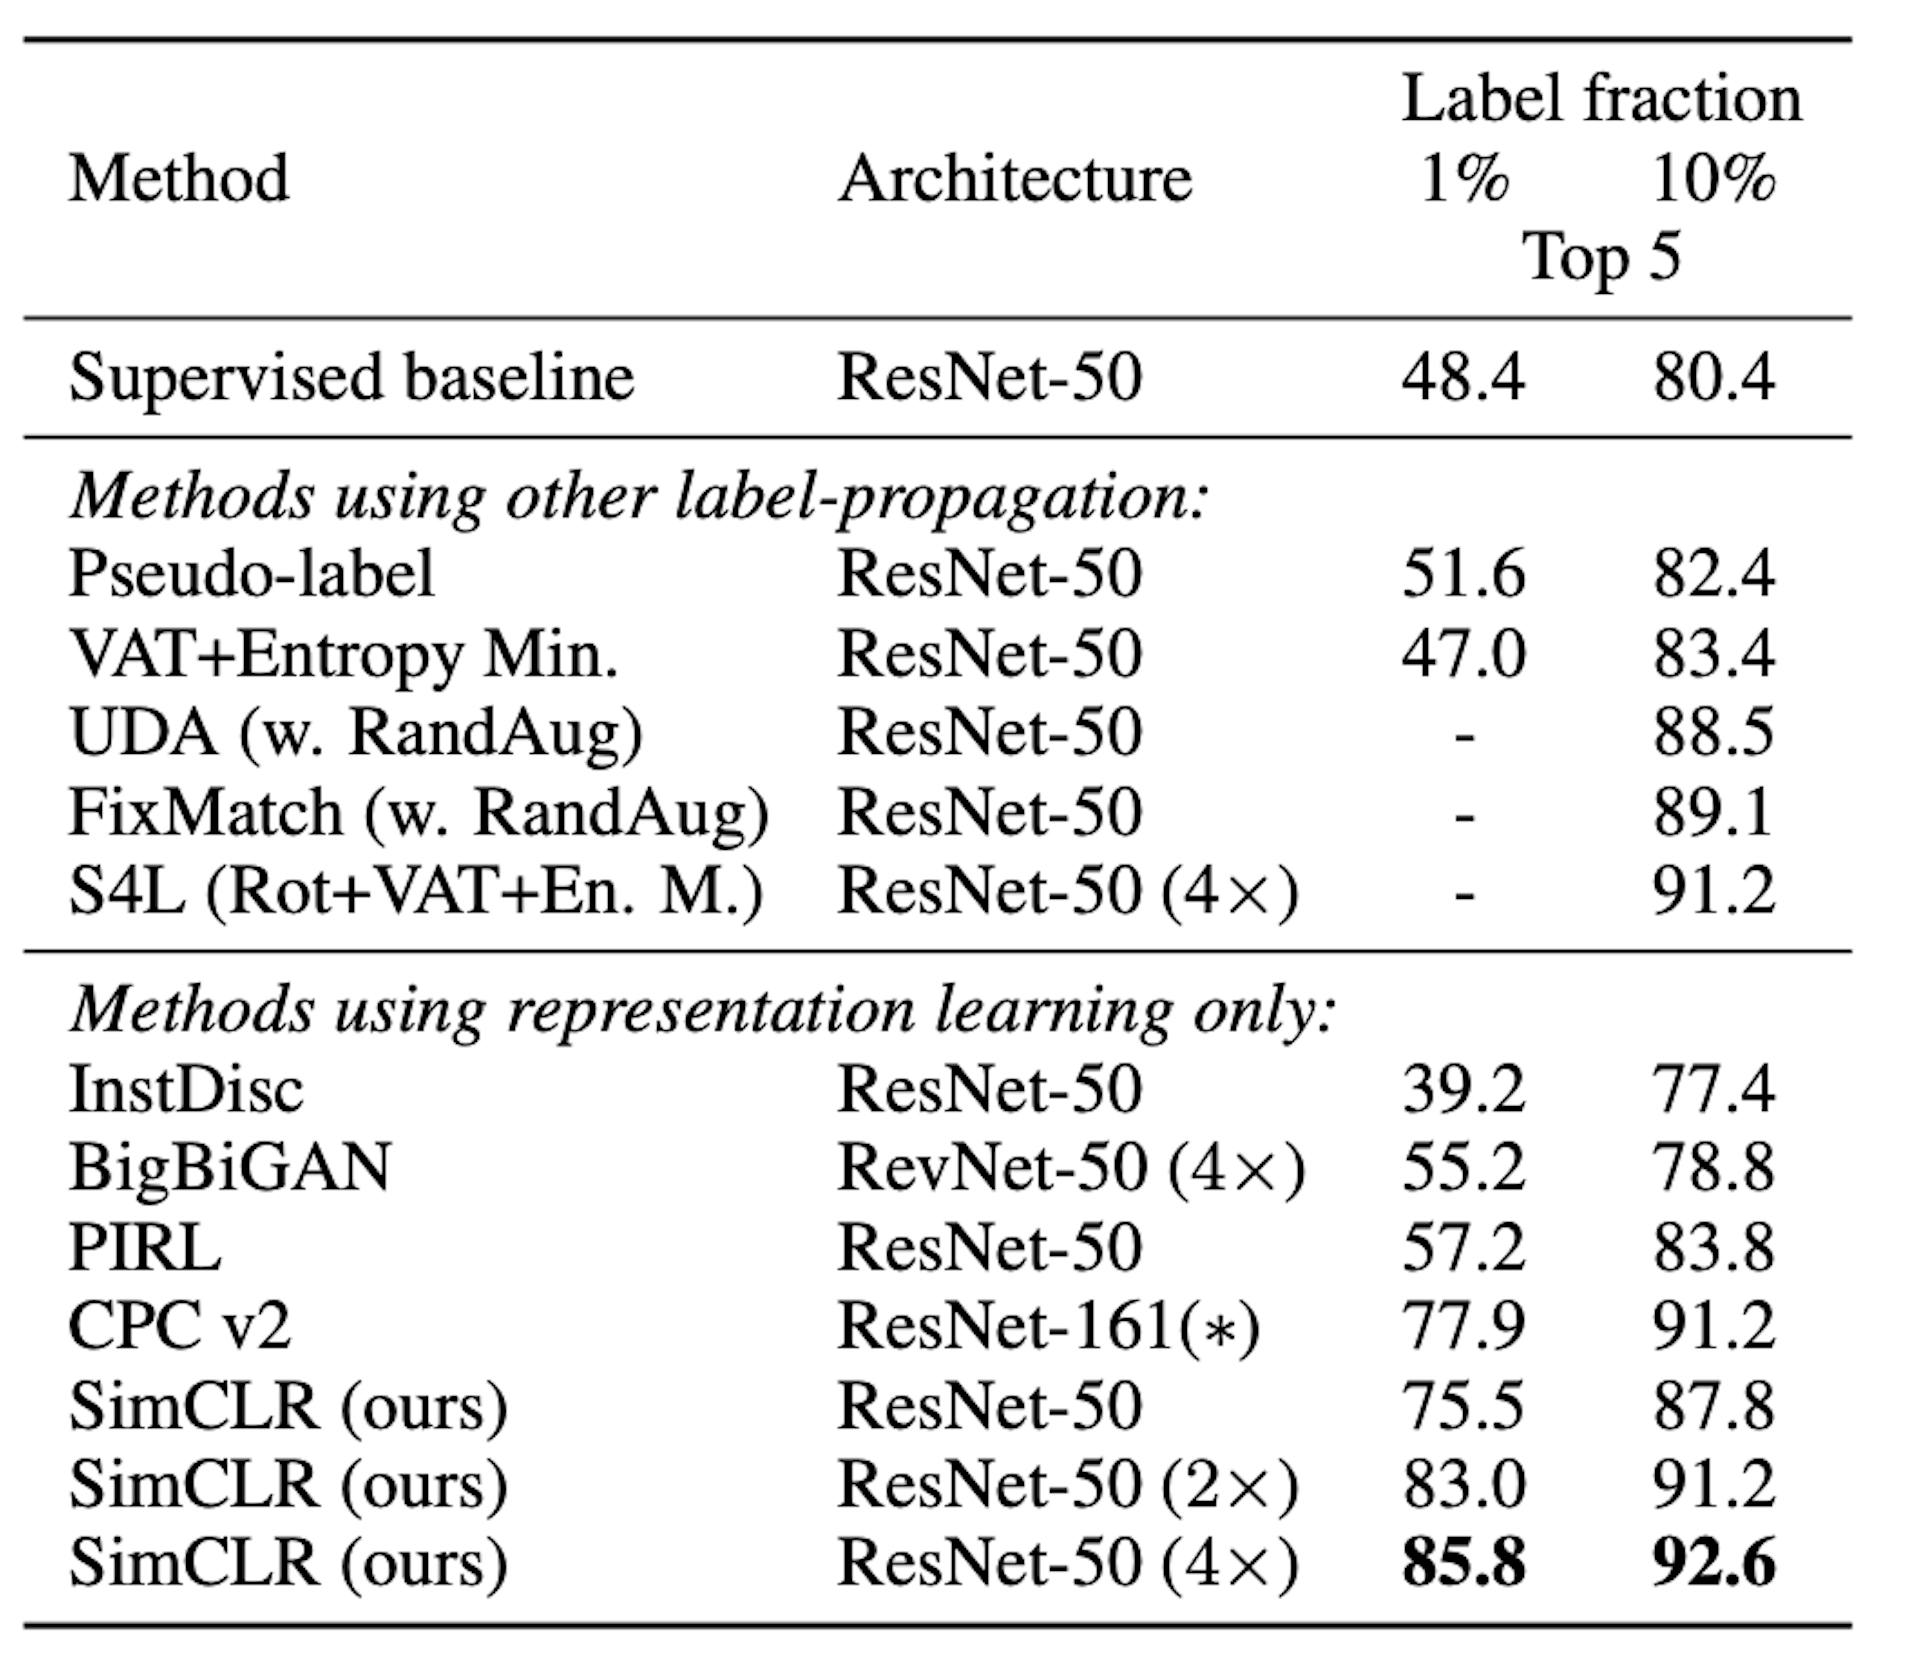 Figure 2: ImageNet accuracy of models with few labels